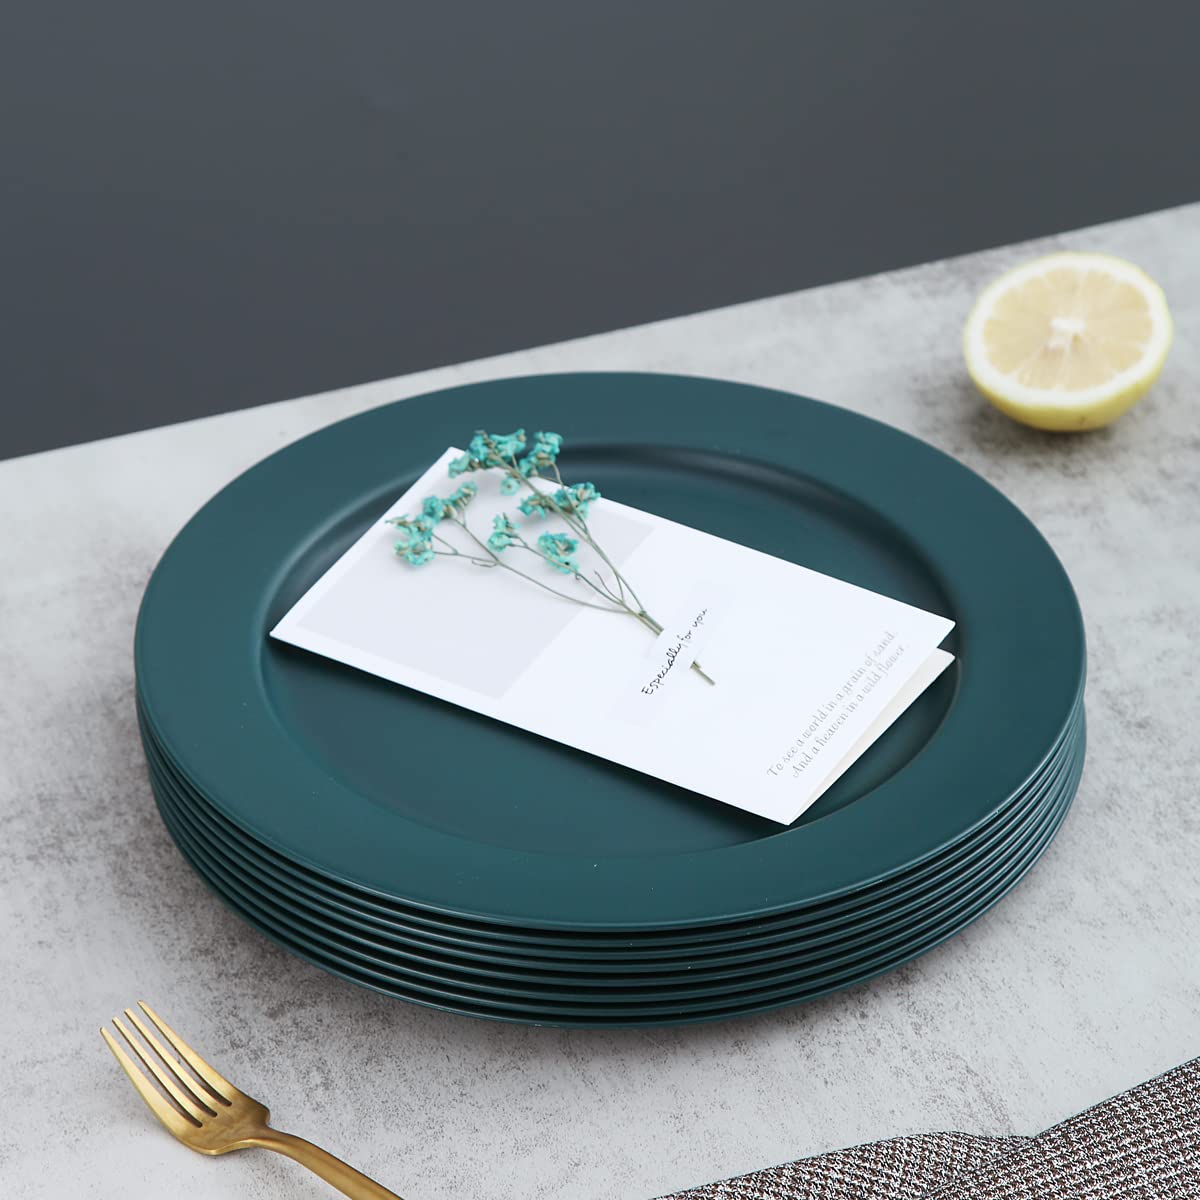 Kyraton 10 Inch Large Plastic Plates 8 Pieces, Dishwasher Safe, Unbreakable And Reusable Light Weight Dinner Plates Microwave Safe BPA Free (Dark Green)